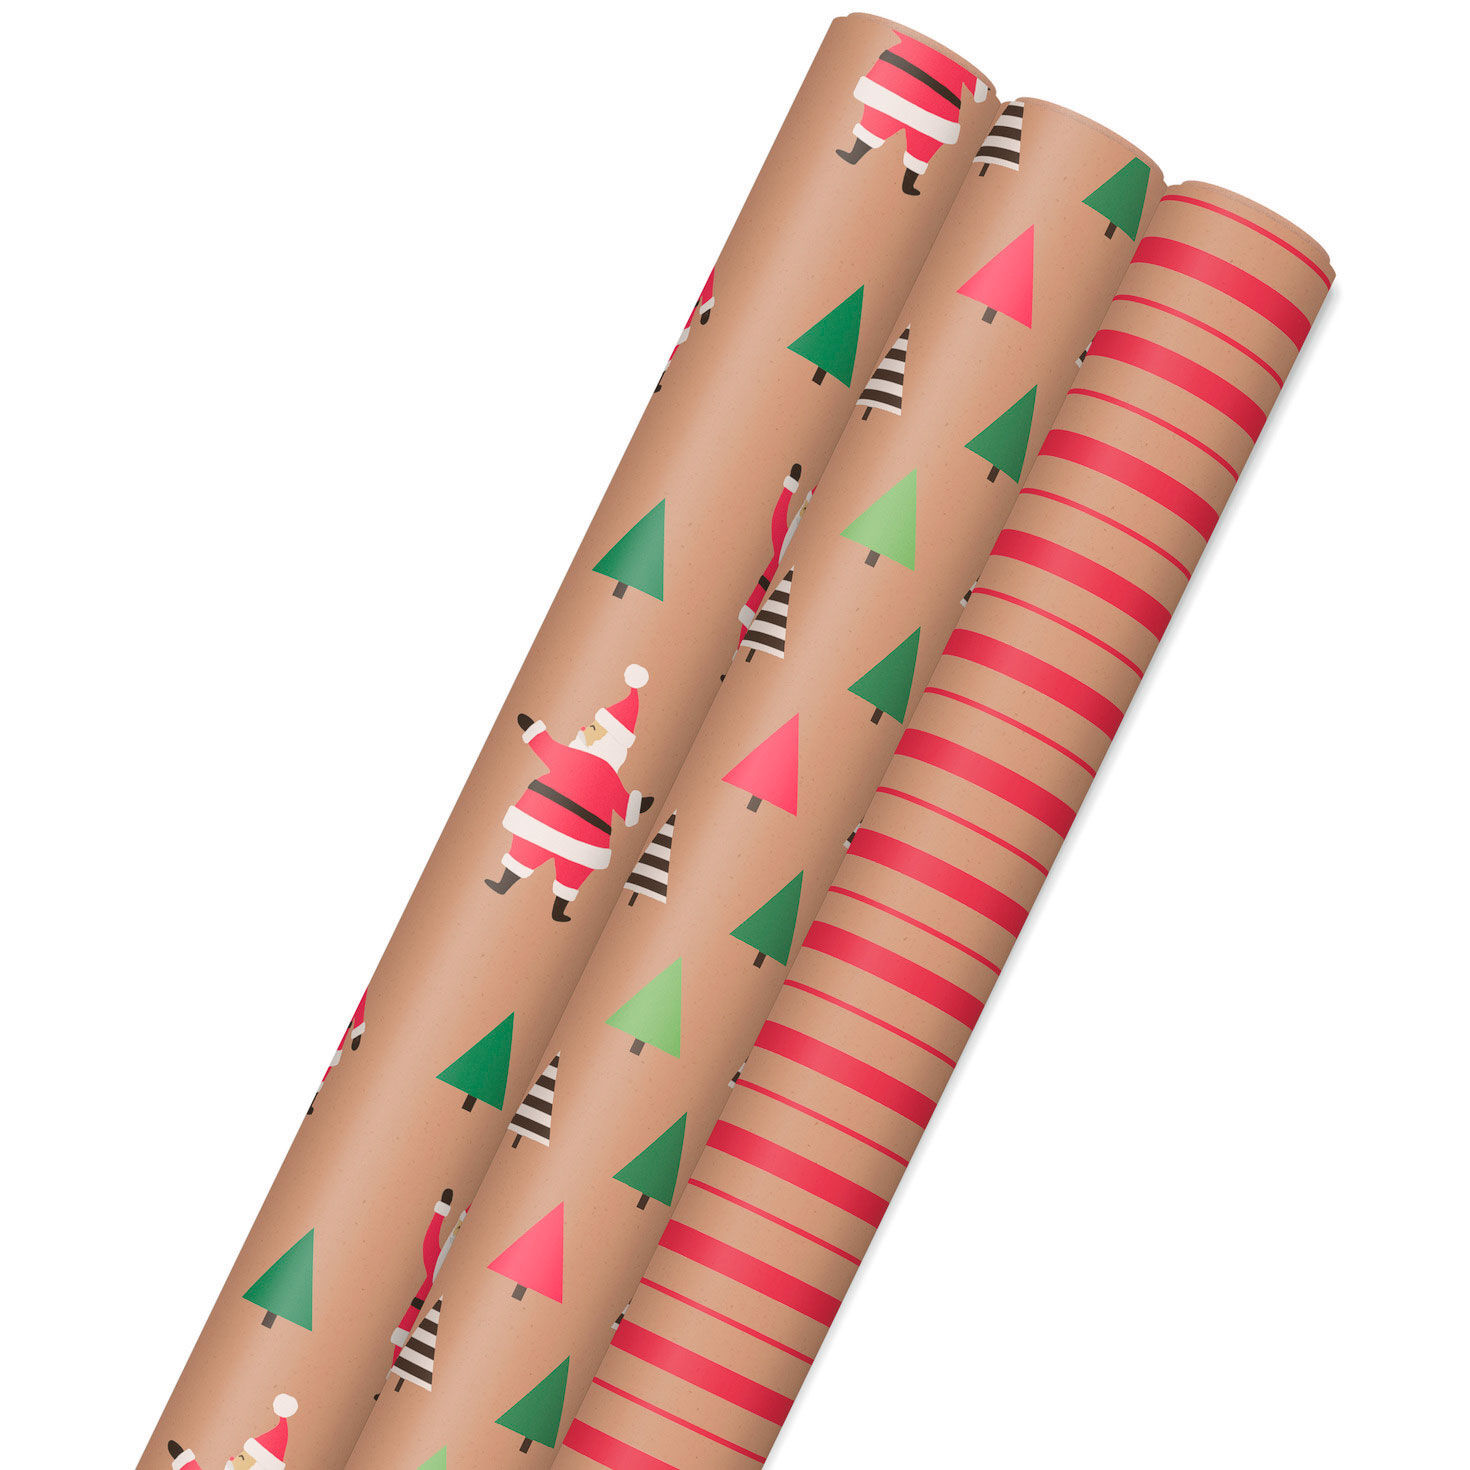 Merry Kraft Prints 3-Pack Christmas Wrapping Paper, 90 sq. ft. for only USD 16.99 | Hallmark